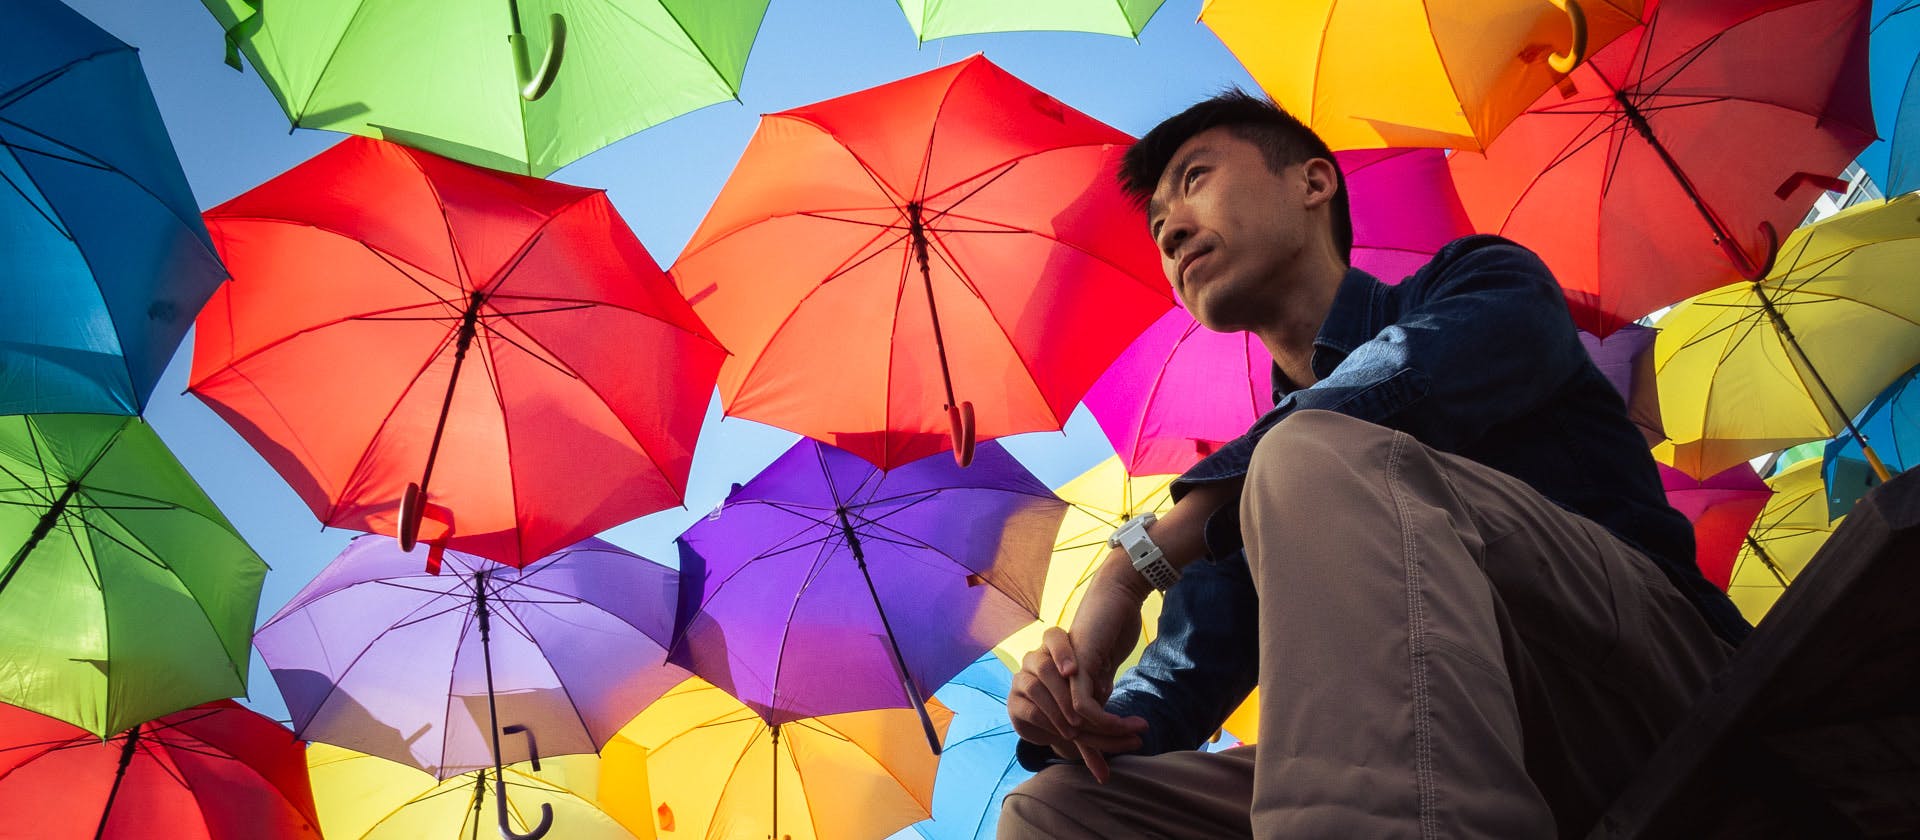 Charlie Chao looking up while sitting under colorful umbrellas